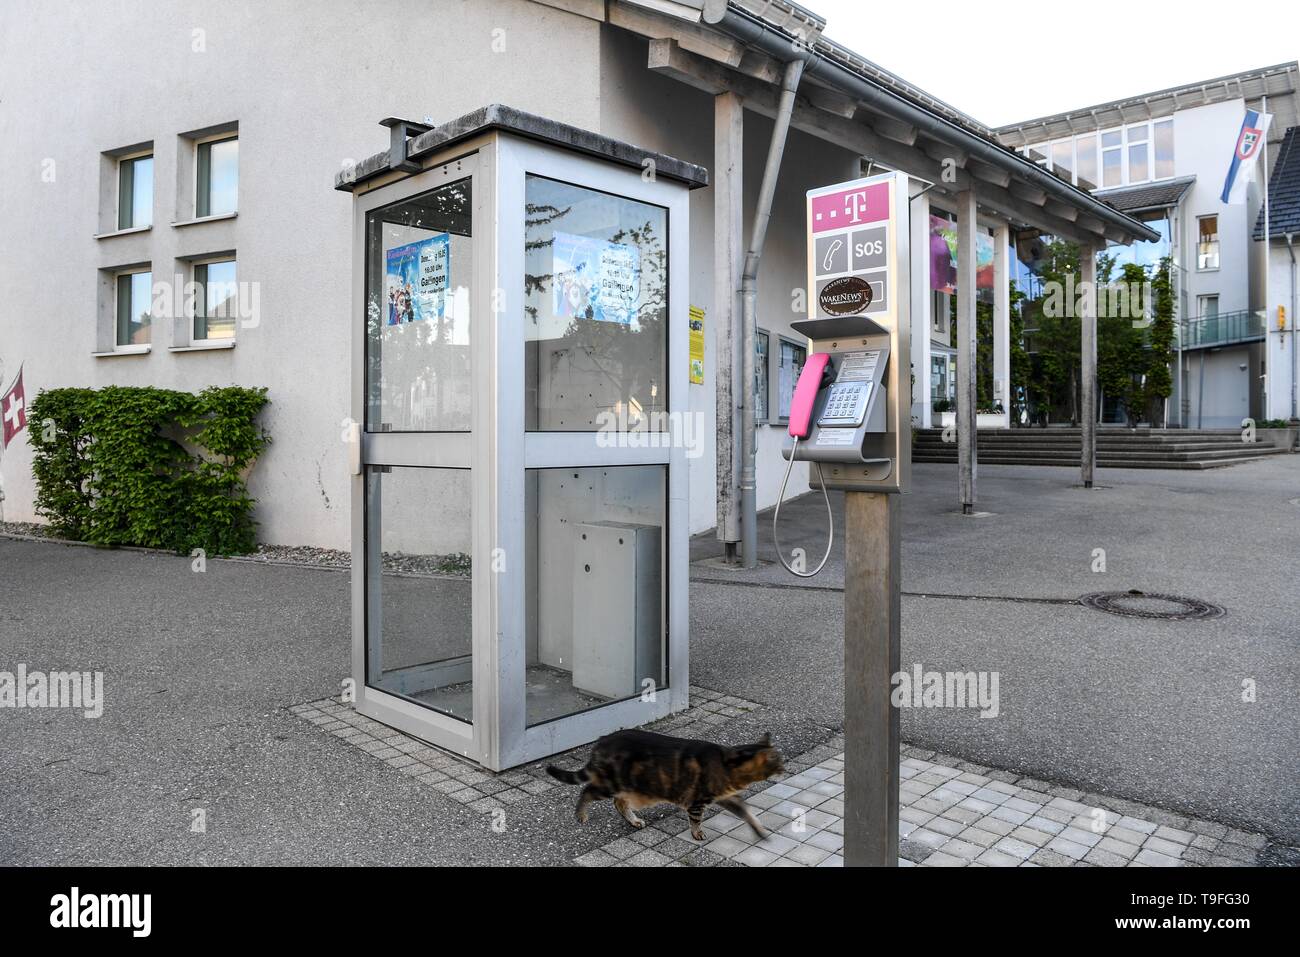 13 May 2019, Baden-Wuerttemberg, Büsingen am Hochrhein: A telephone box  from Switzerland (l) which has been taken out of service is located in the  centre of town next to a public telephone